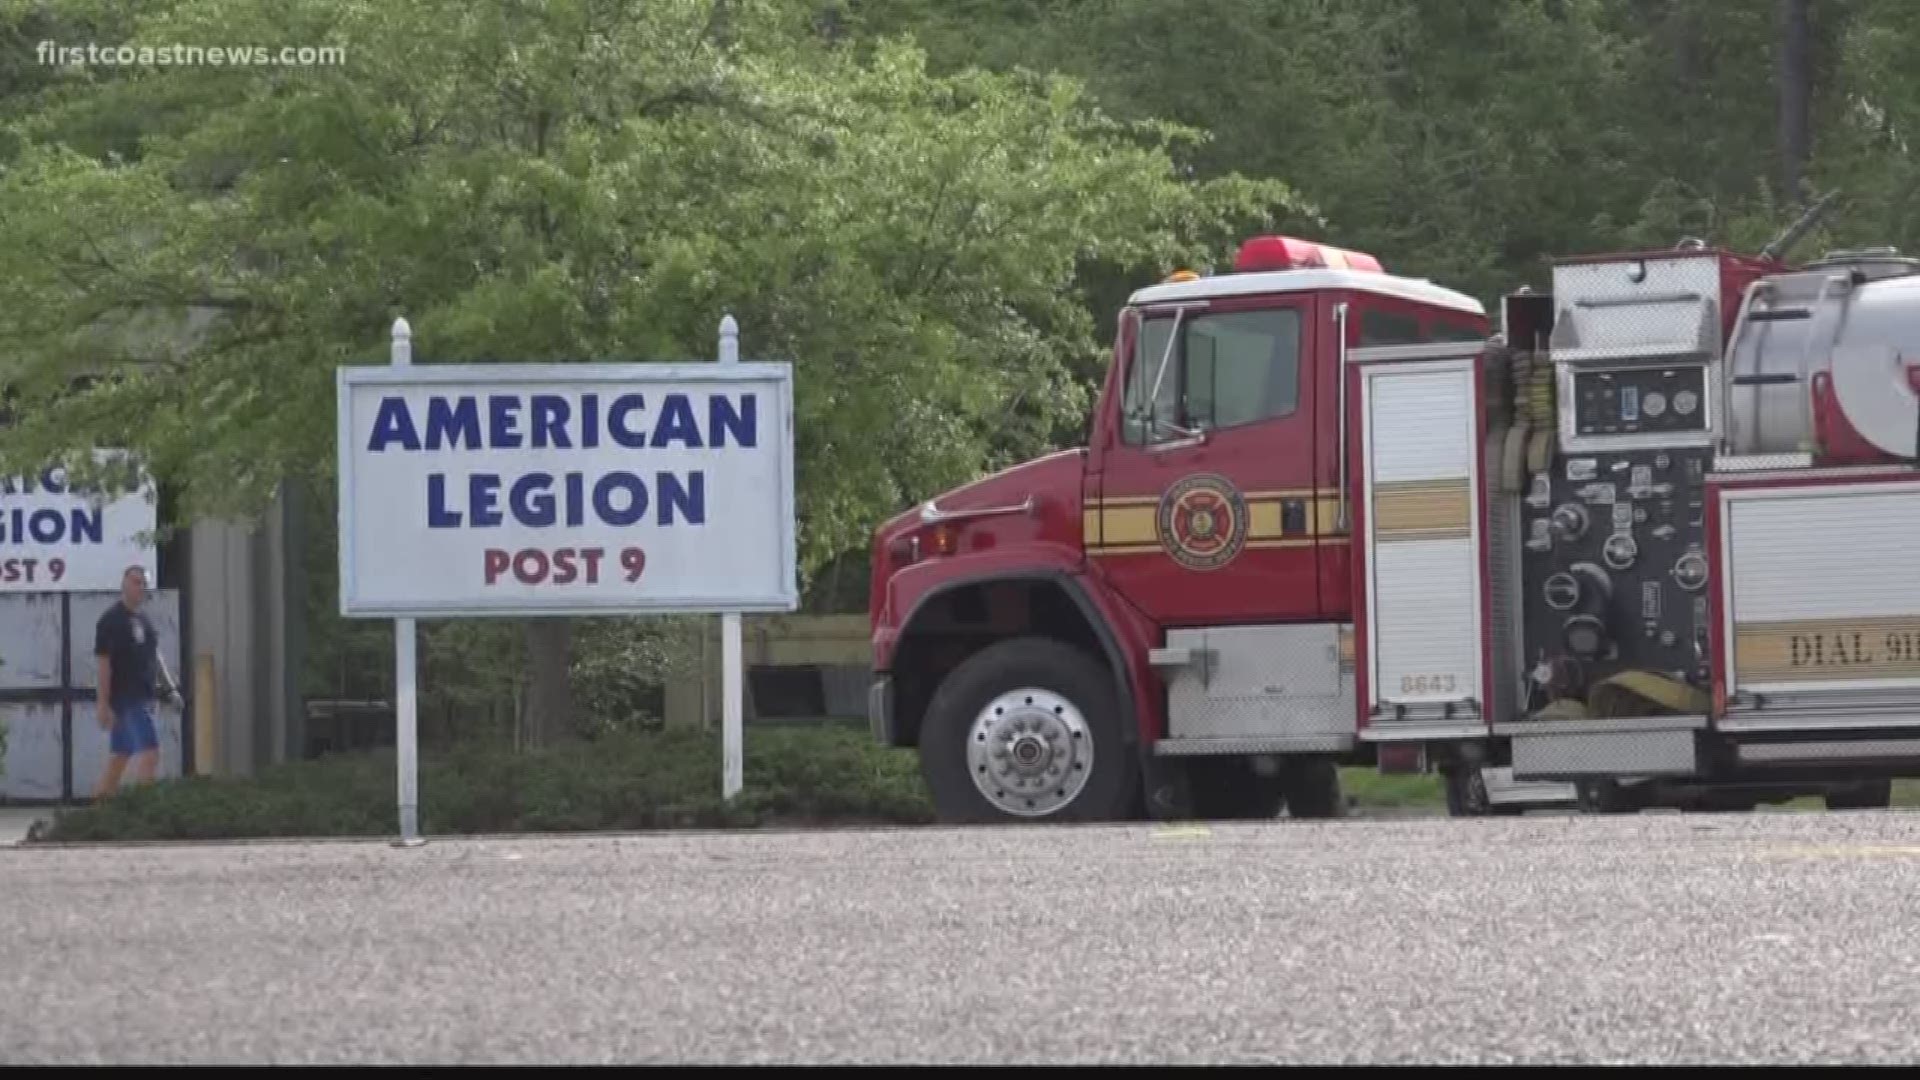 The state fire marshal is looking into a fire that broke out at the American Legion 9 location on Sunday.